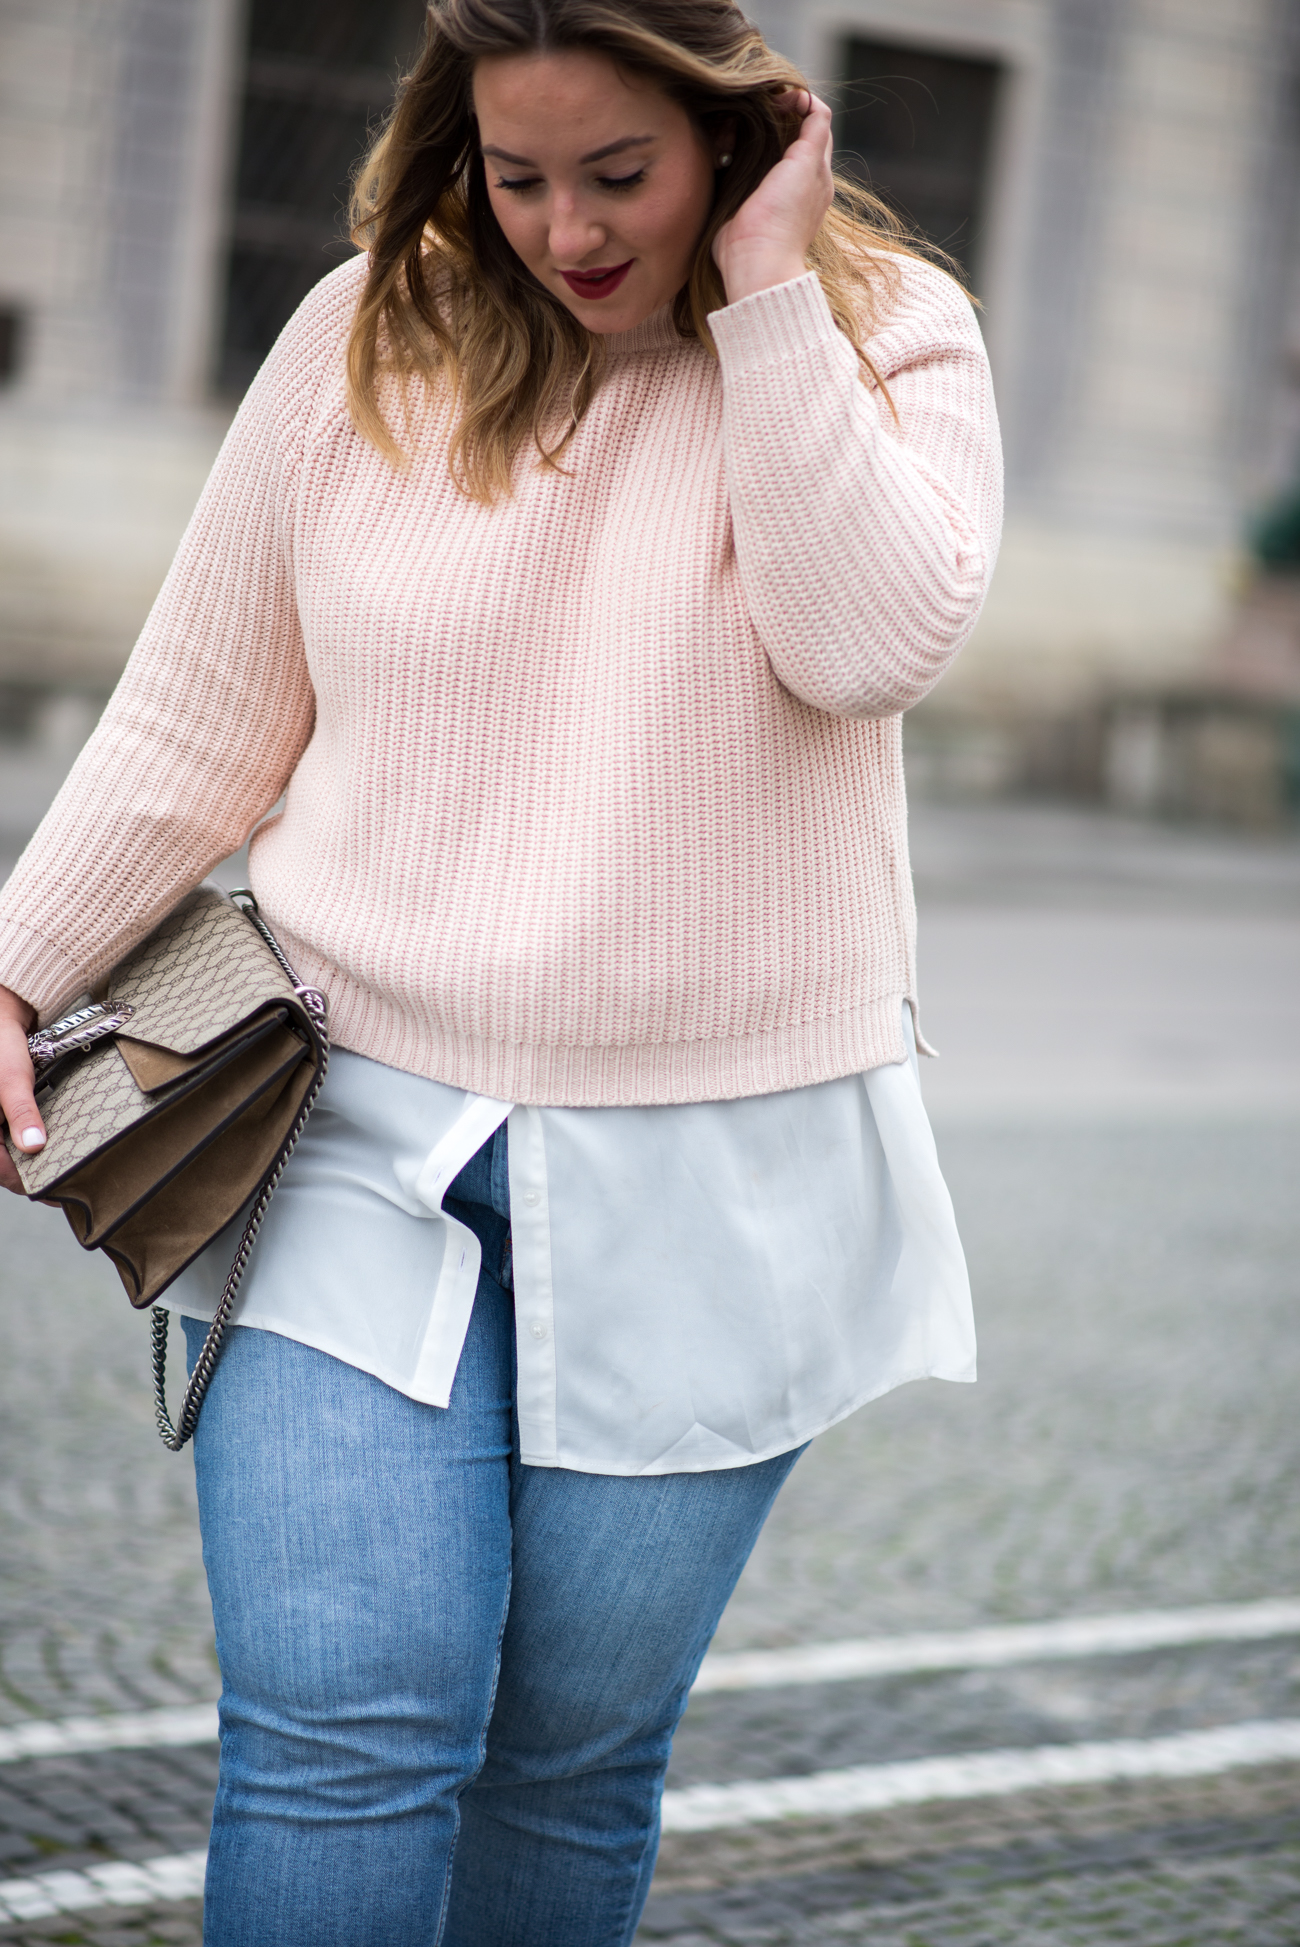 the-skinny-and-the-curvy-one_fashion_plussize_marina-rinaldi_chanel_jeans_blue-jeans_curve-outfit-inspo_muenchen-blogger_daily-outfit_plus-size-blog_plus-size-blogger-deutschland_-5-von-23